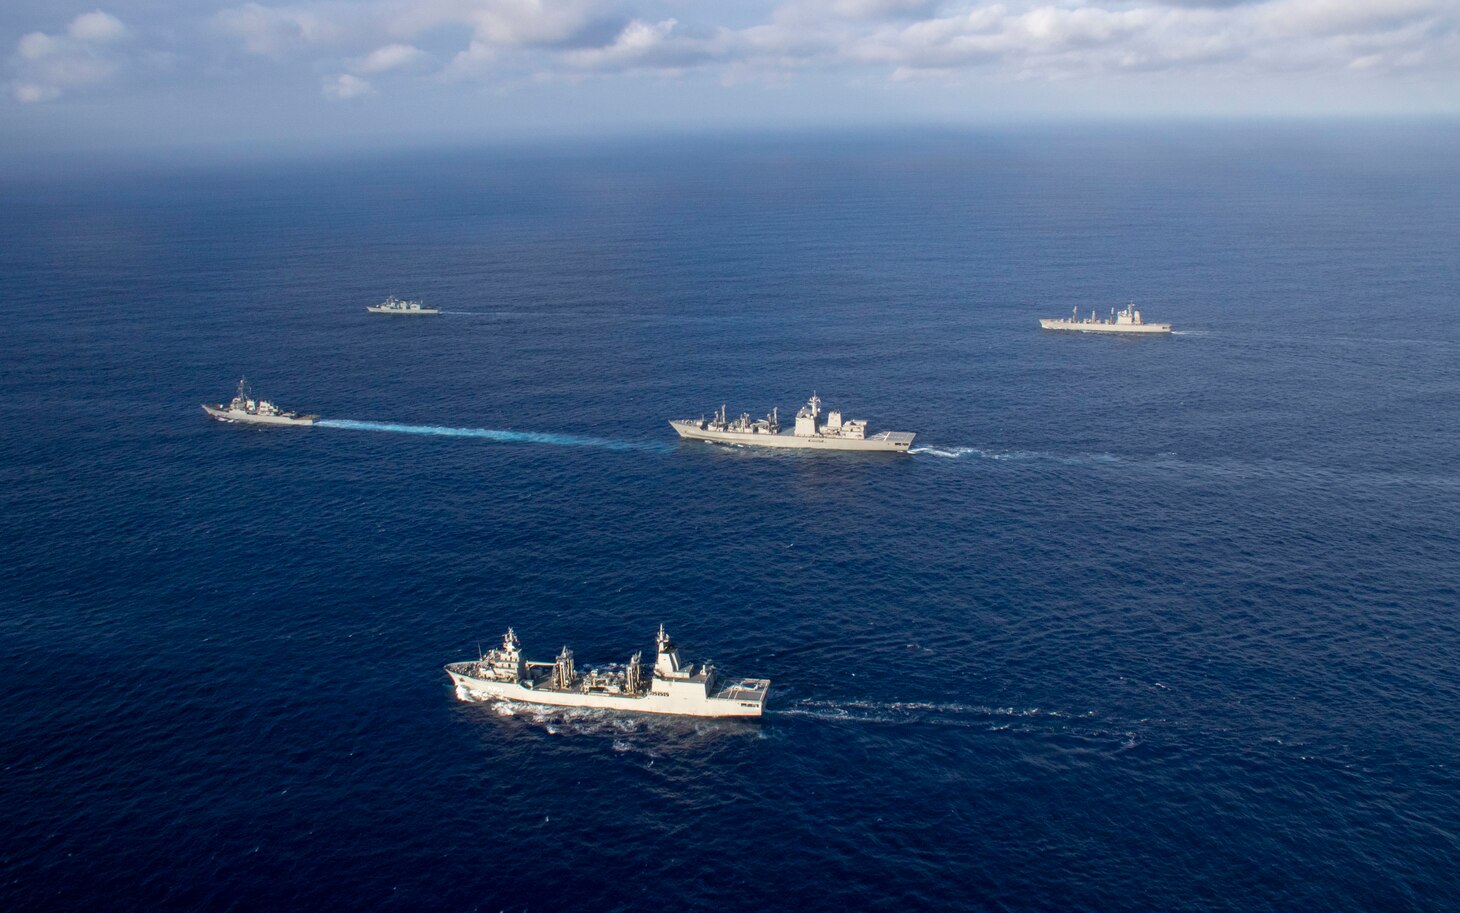 231110-N-TD381-1317 PHILIPPINE SEA (Nov. 10, 2023) Ships from the Japan Maritime Self-Defense Force, Royal Australian Navy, Royal Canadian Navy and United States Navy sail in formation during Annual Exercise (ANNUALEX) 2023. ANNUALEX is a multilateral exercise conducted by naval elements of the Royal Australian, Royal Canadian, Japan Maritime Self-Defense Force, and U.S. navies to demonstrate naval interoperability and a joint commitment to a free and open Indo-Pacific. Vinson, flagship of Carrier Strike Group ONE, is deployed to the U.S. 7th Fleet area of operations in support of a free and open Indo-Pacific. (U.S. Navy photo by Mass Communication Specialist 3rd Class Isaiah Goessl)